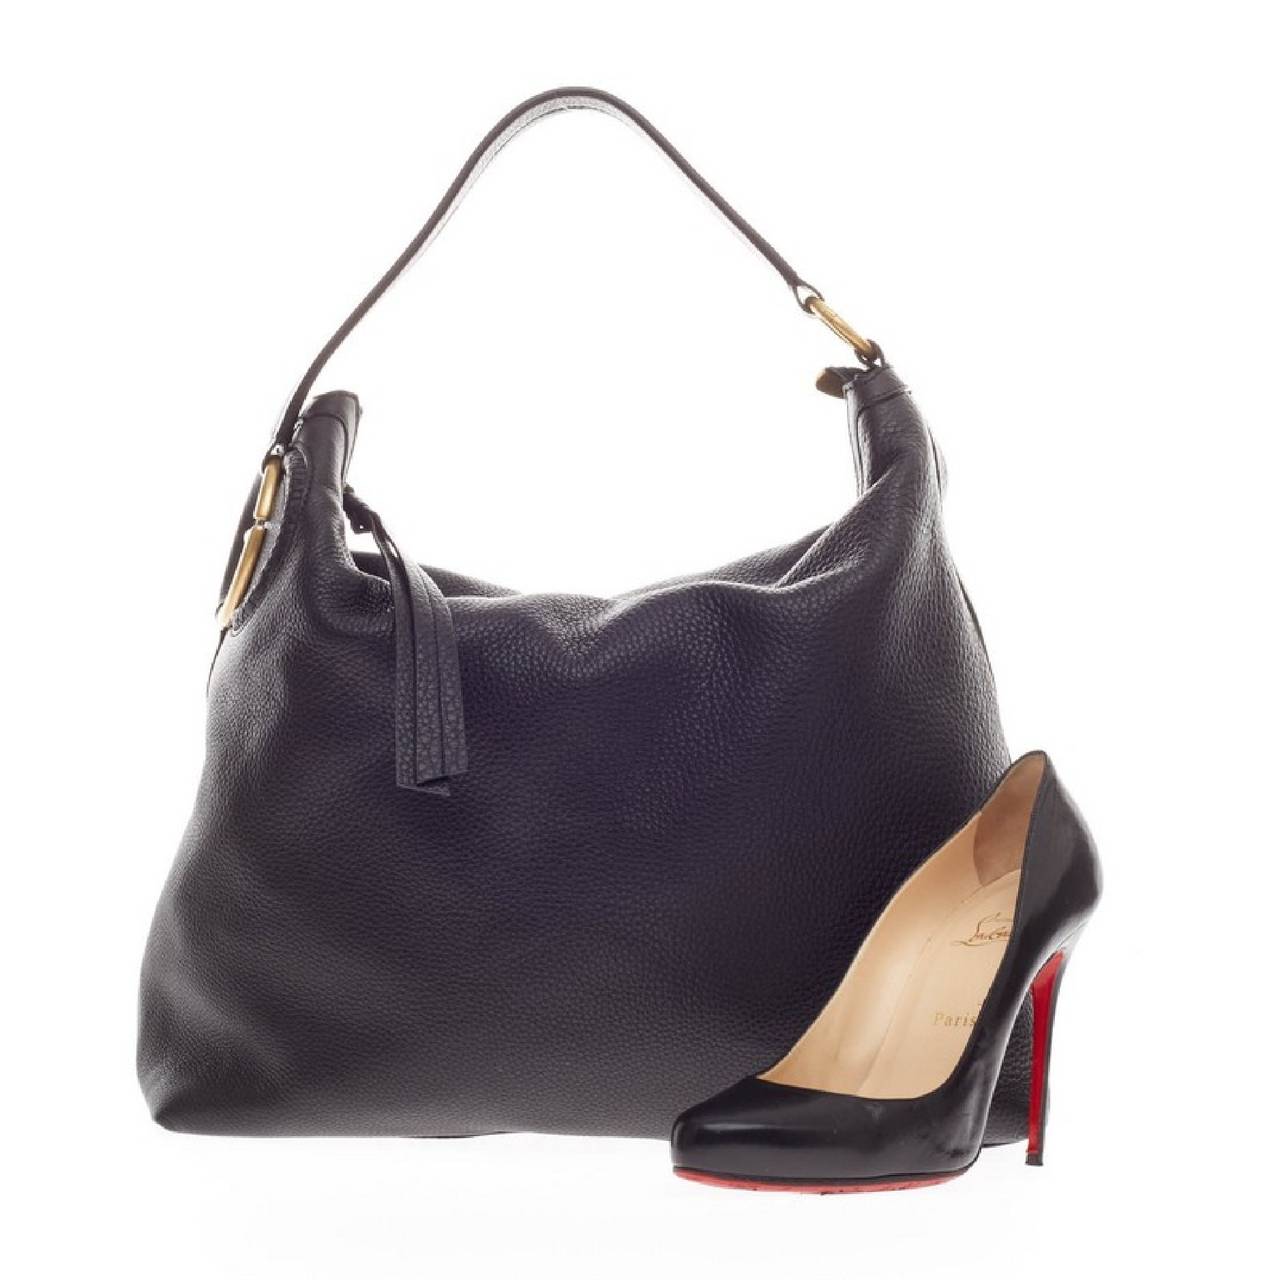 This authentic Gucci Twill Hobo Leather is perfect for everyday casual look with its lightweight and simplistic nature. Crafted in supple black twill leather, this stylish hobo features a single flat leather shoulder strap with rings, interlocking G